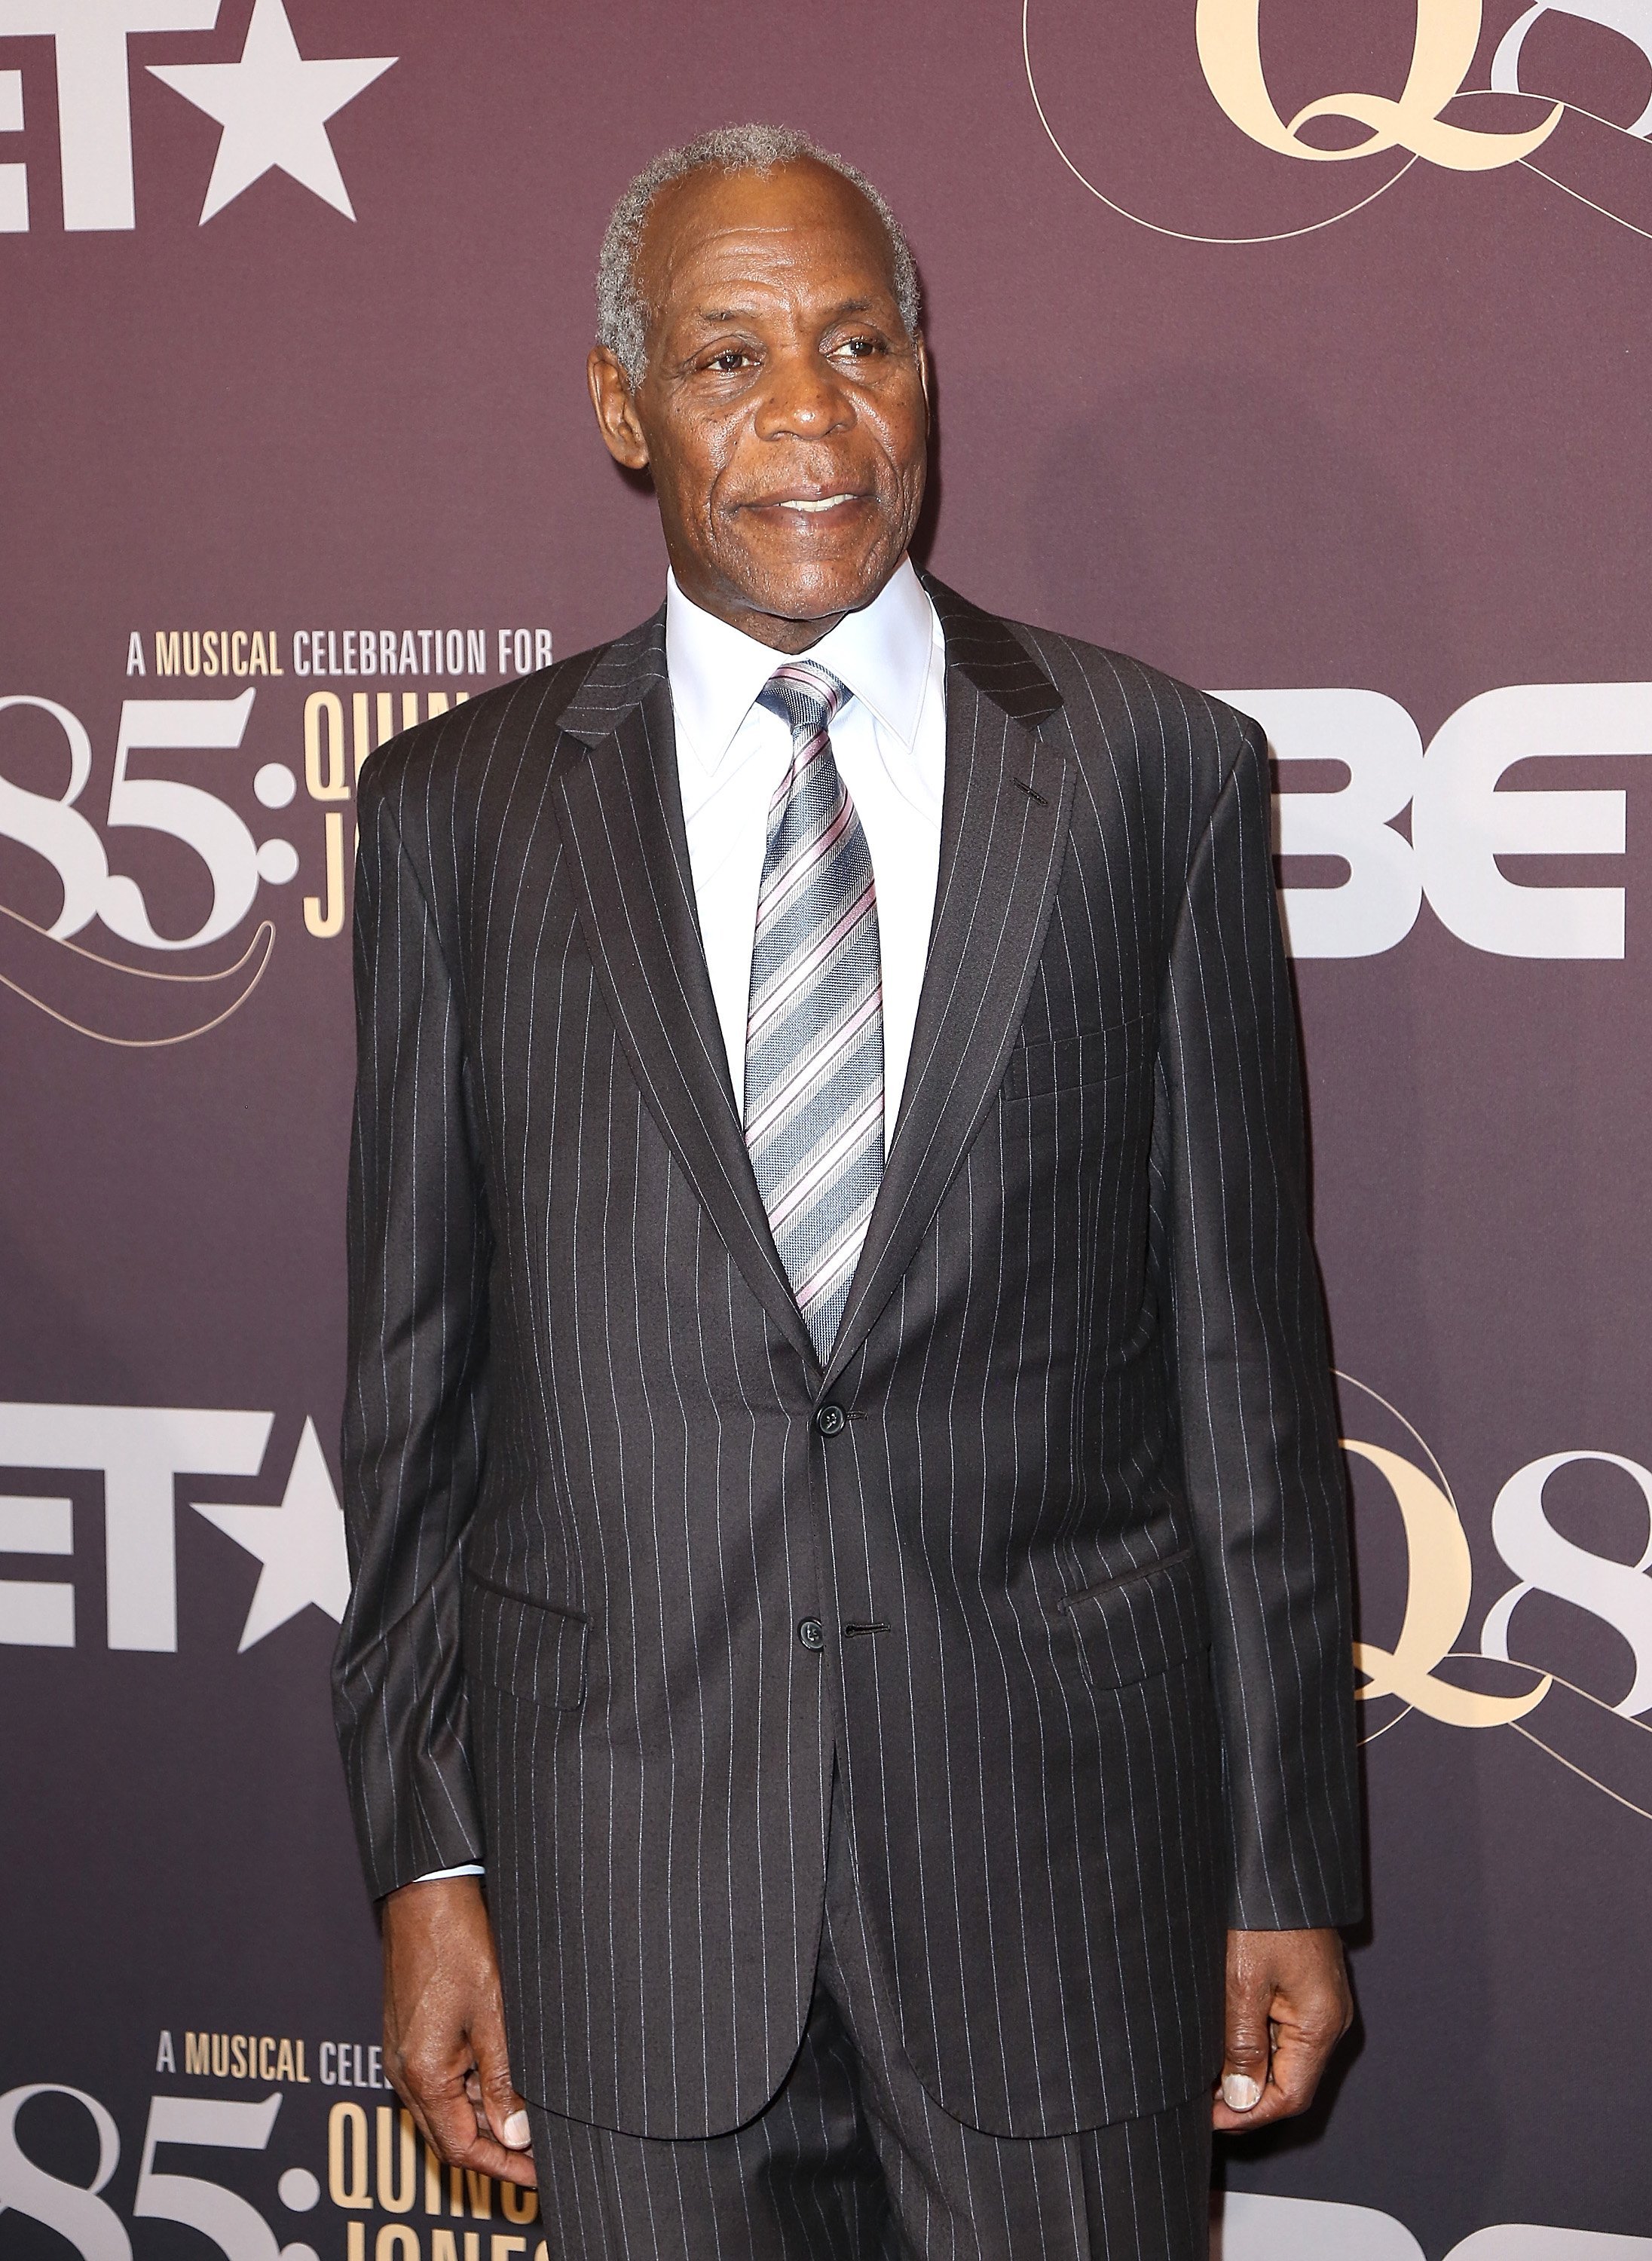 Danny Glover attends "Q85: A Musical Celebration for Quincy Jones" in Los Angeles, California on September 25, 2018 | Photo: Getty Images